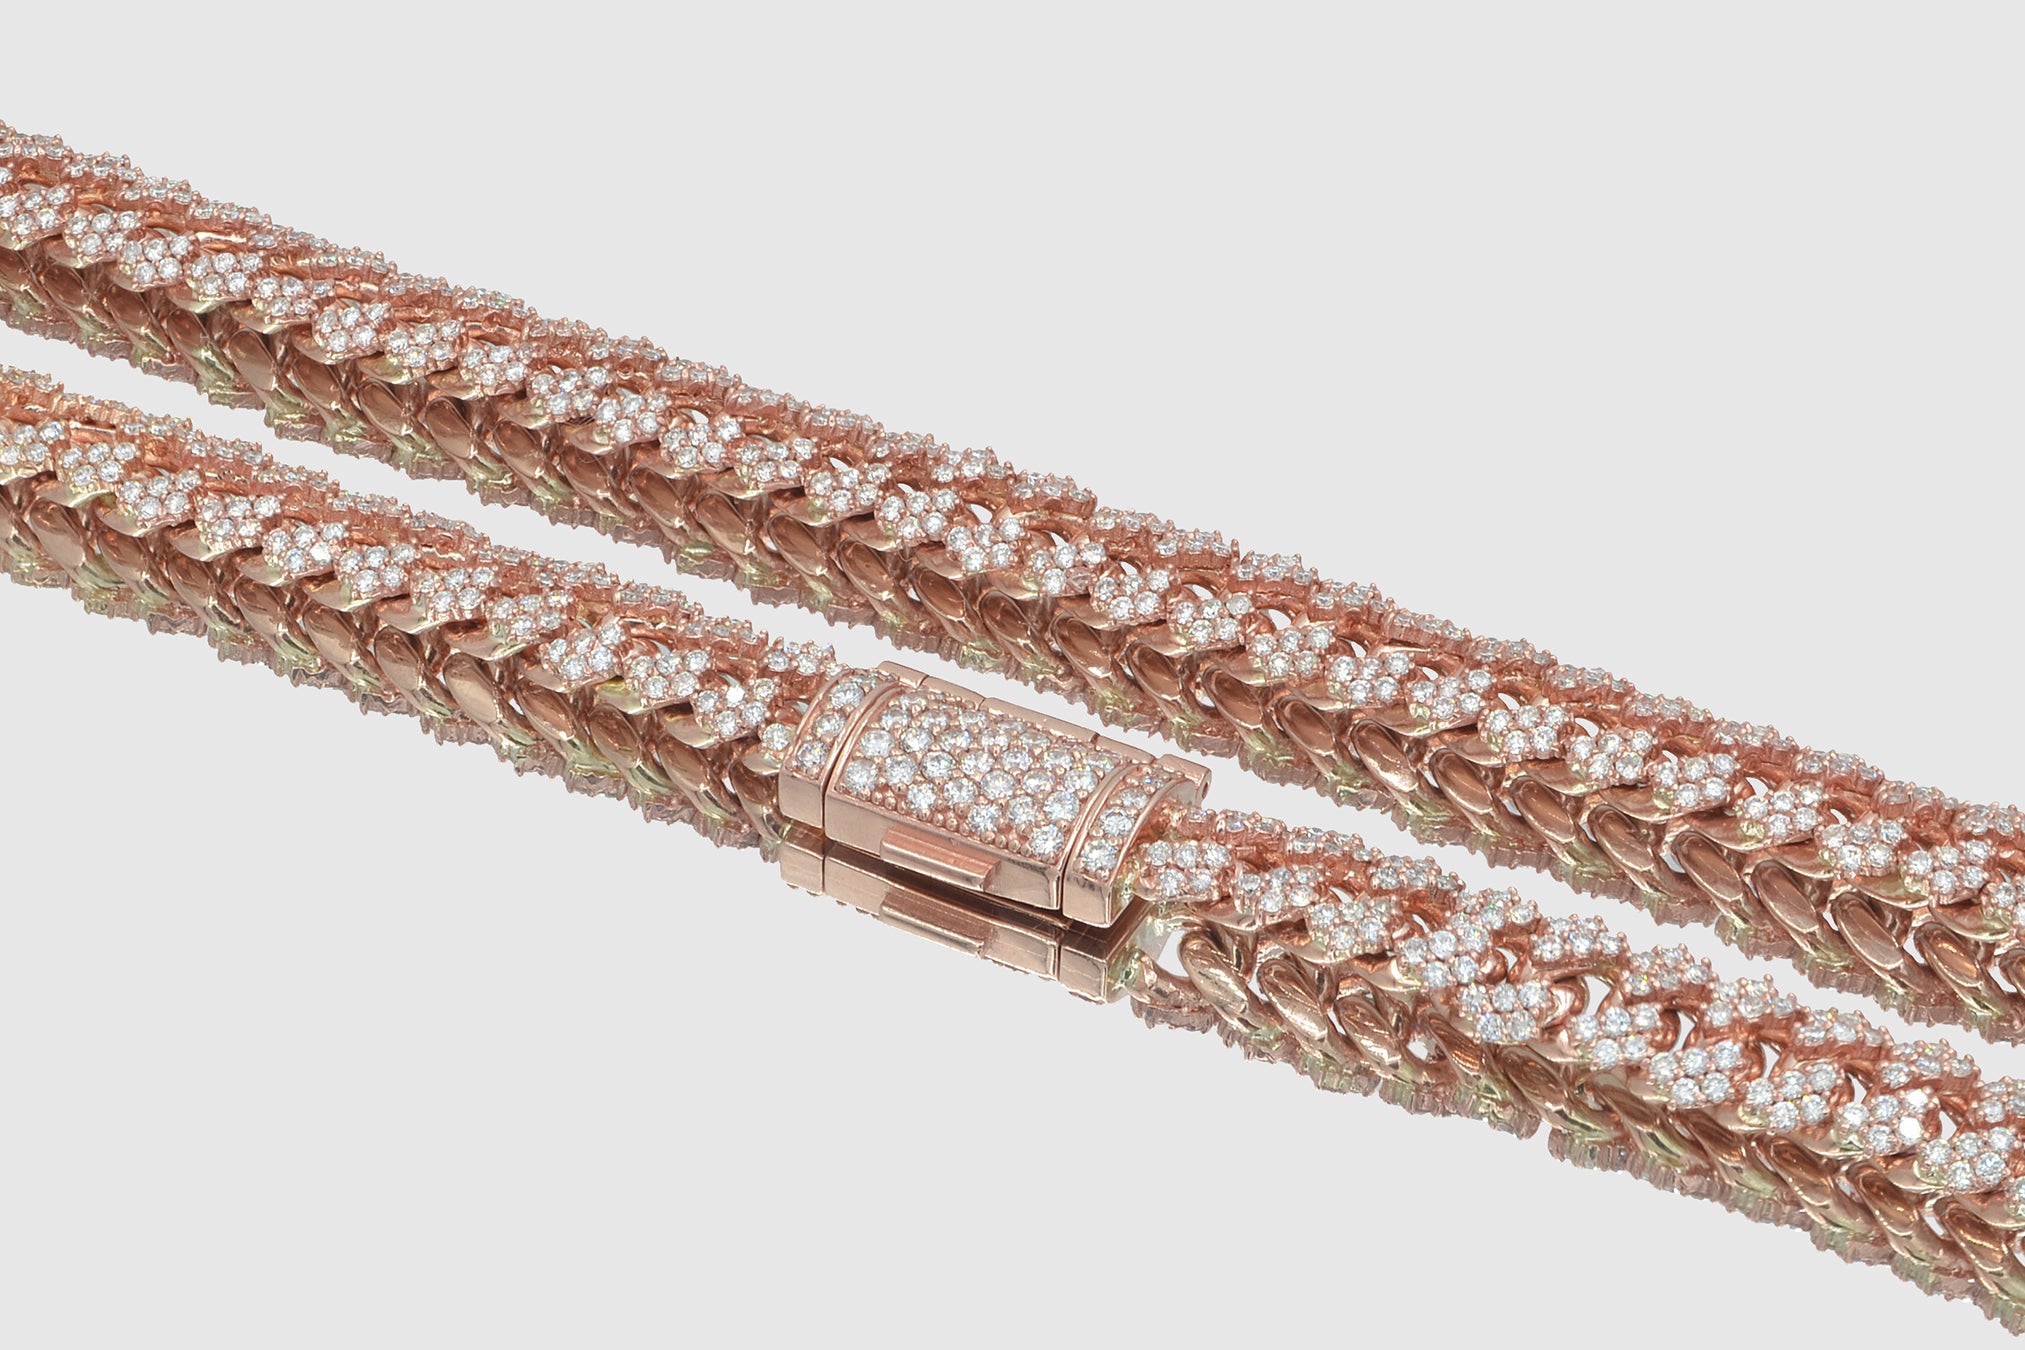 Pink gold and diamonds necklace, 8 mm.